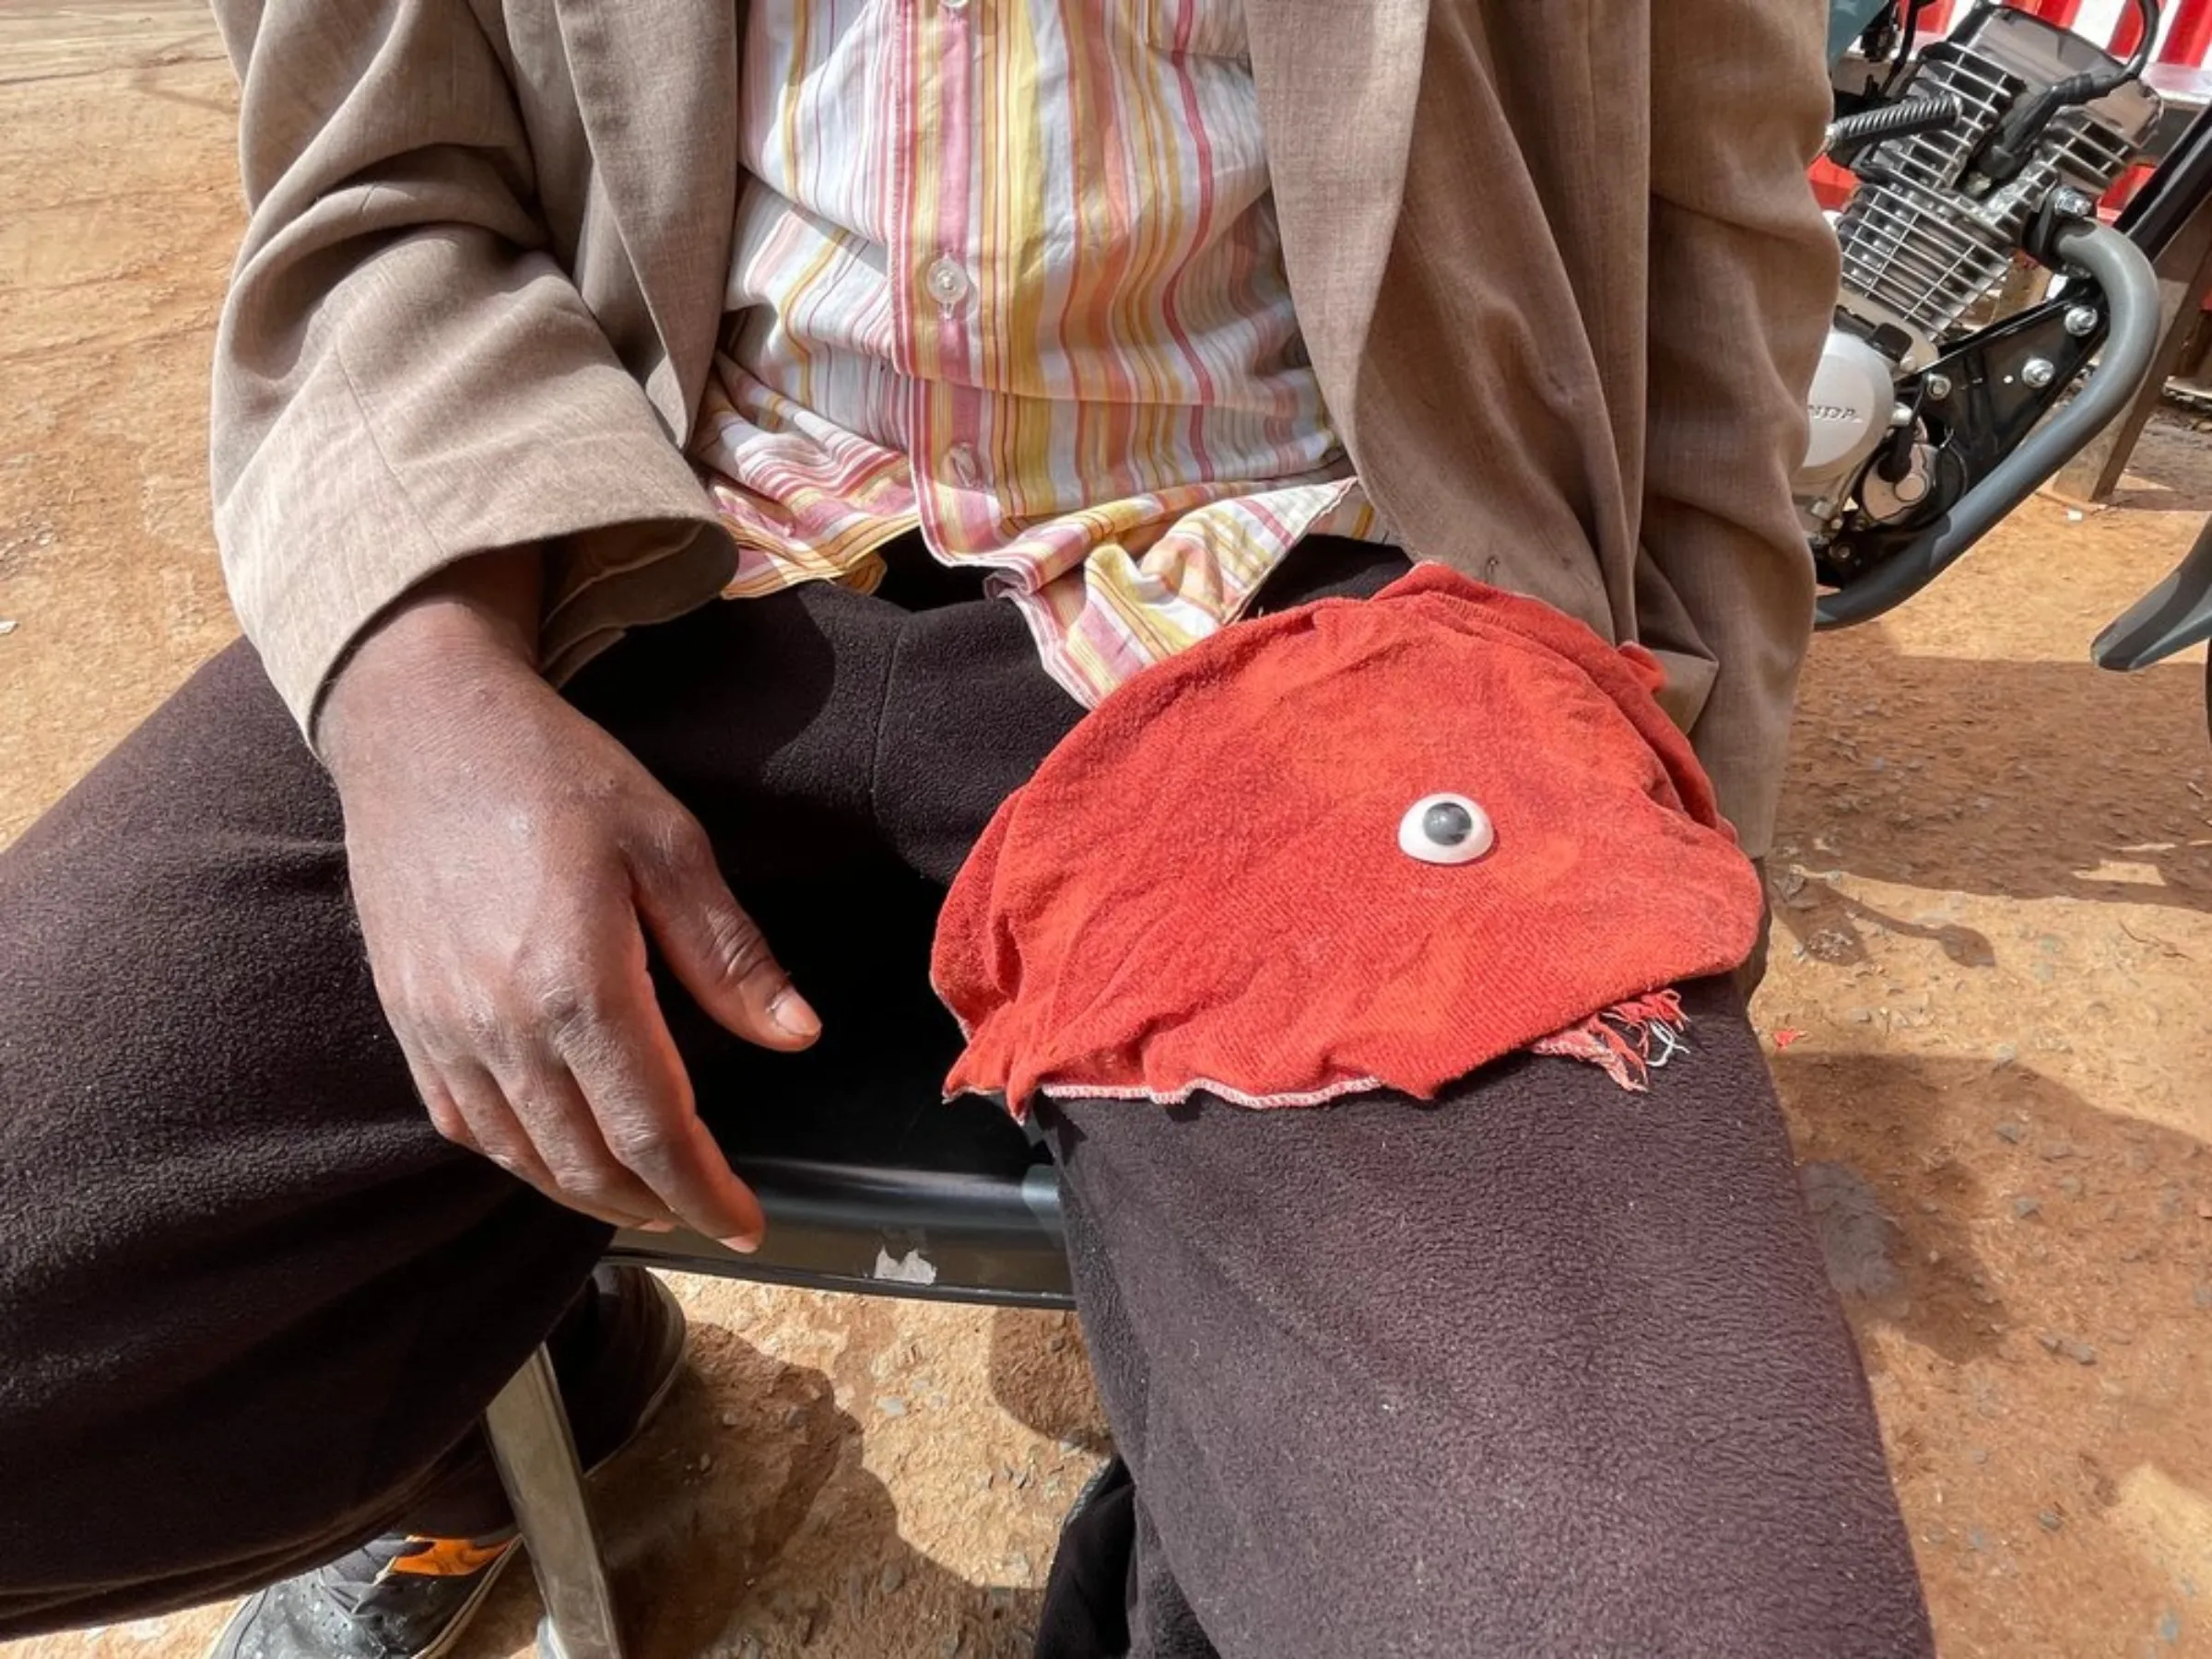 Former Uber Eats driver, Denis, places his synthetic eye on a cloth on his lap in a food courier commune where he lives in the south of Johannesburg, South Africa. He lost his eye and parts of his long-term memory after he was hit while driving for Uber and had to spend months recovering in hospital. 'The other drivers help feed and clothe me,' said Denis. March 22, 2021. Thomson Reuters Foundation/Kim Harrisberg